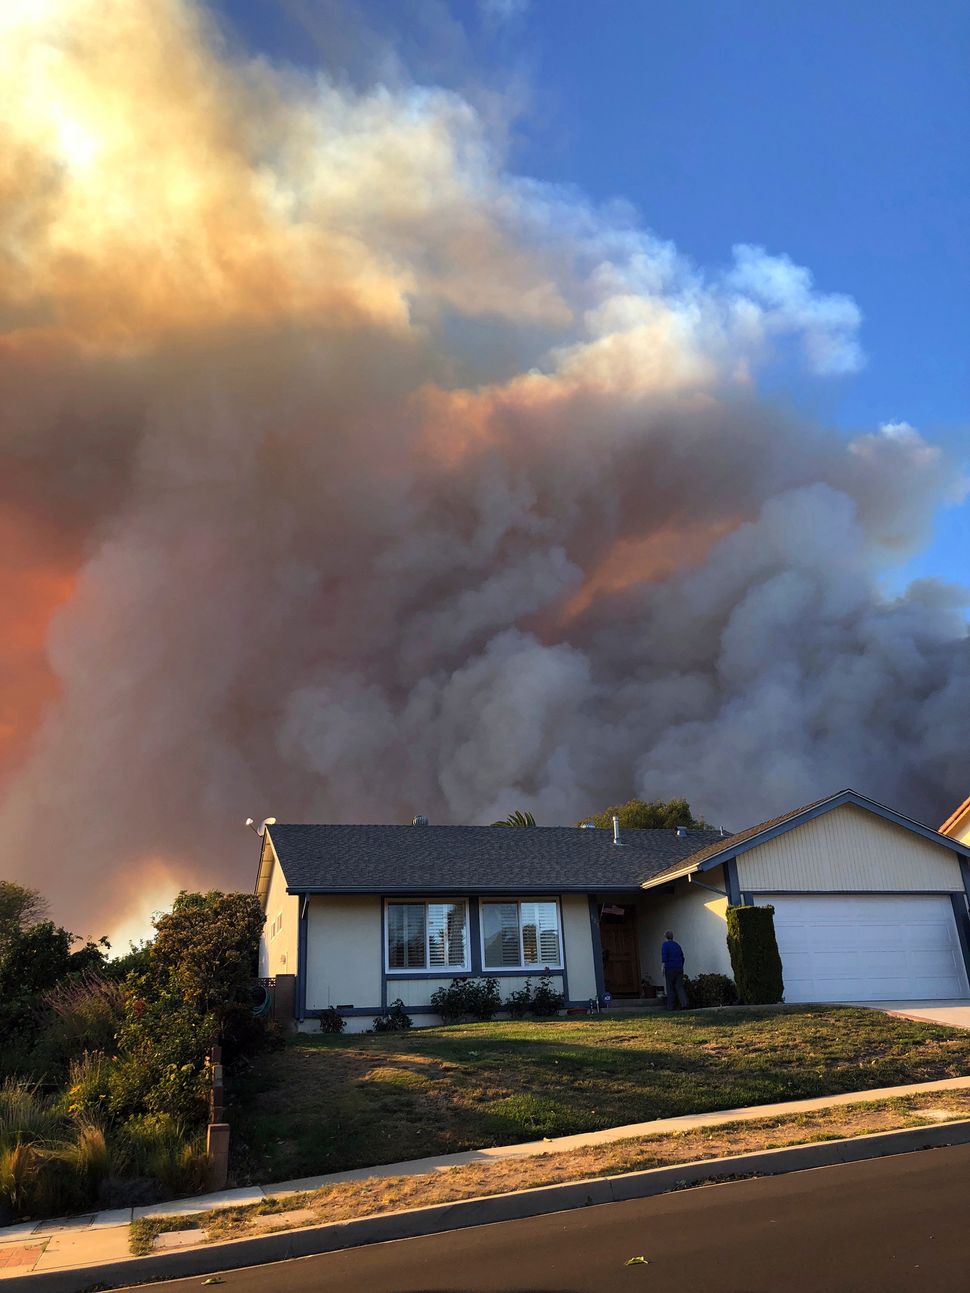 Plumes of smoke loom in the sky several miles away, seen behind a home in Thousand Oaks, Calif.